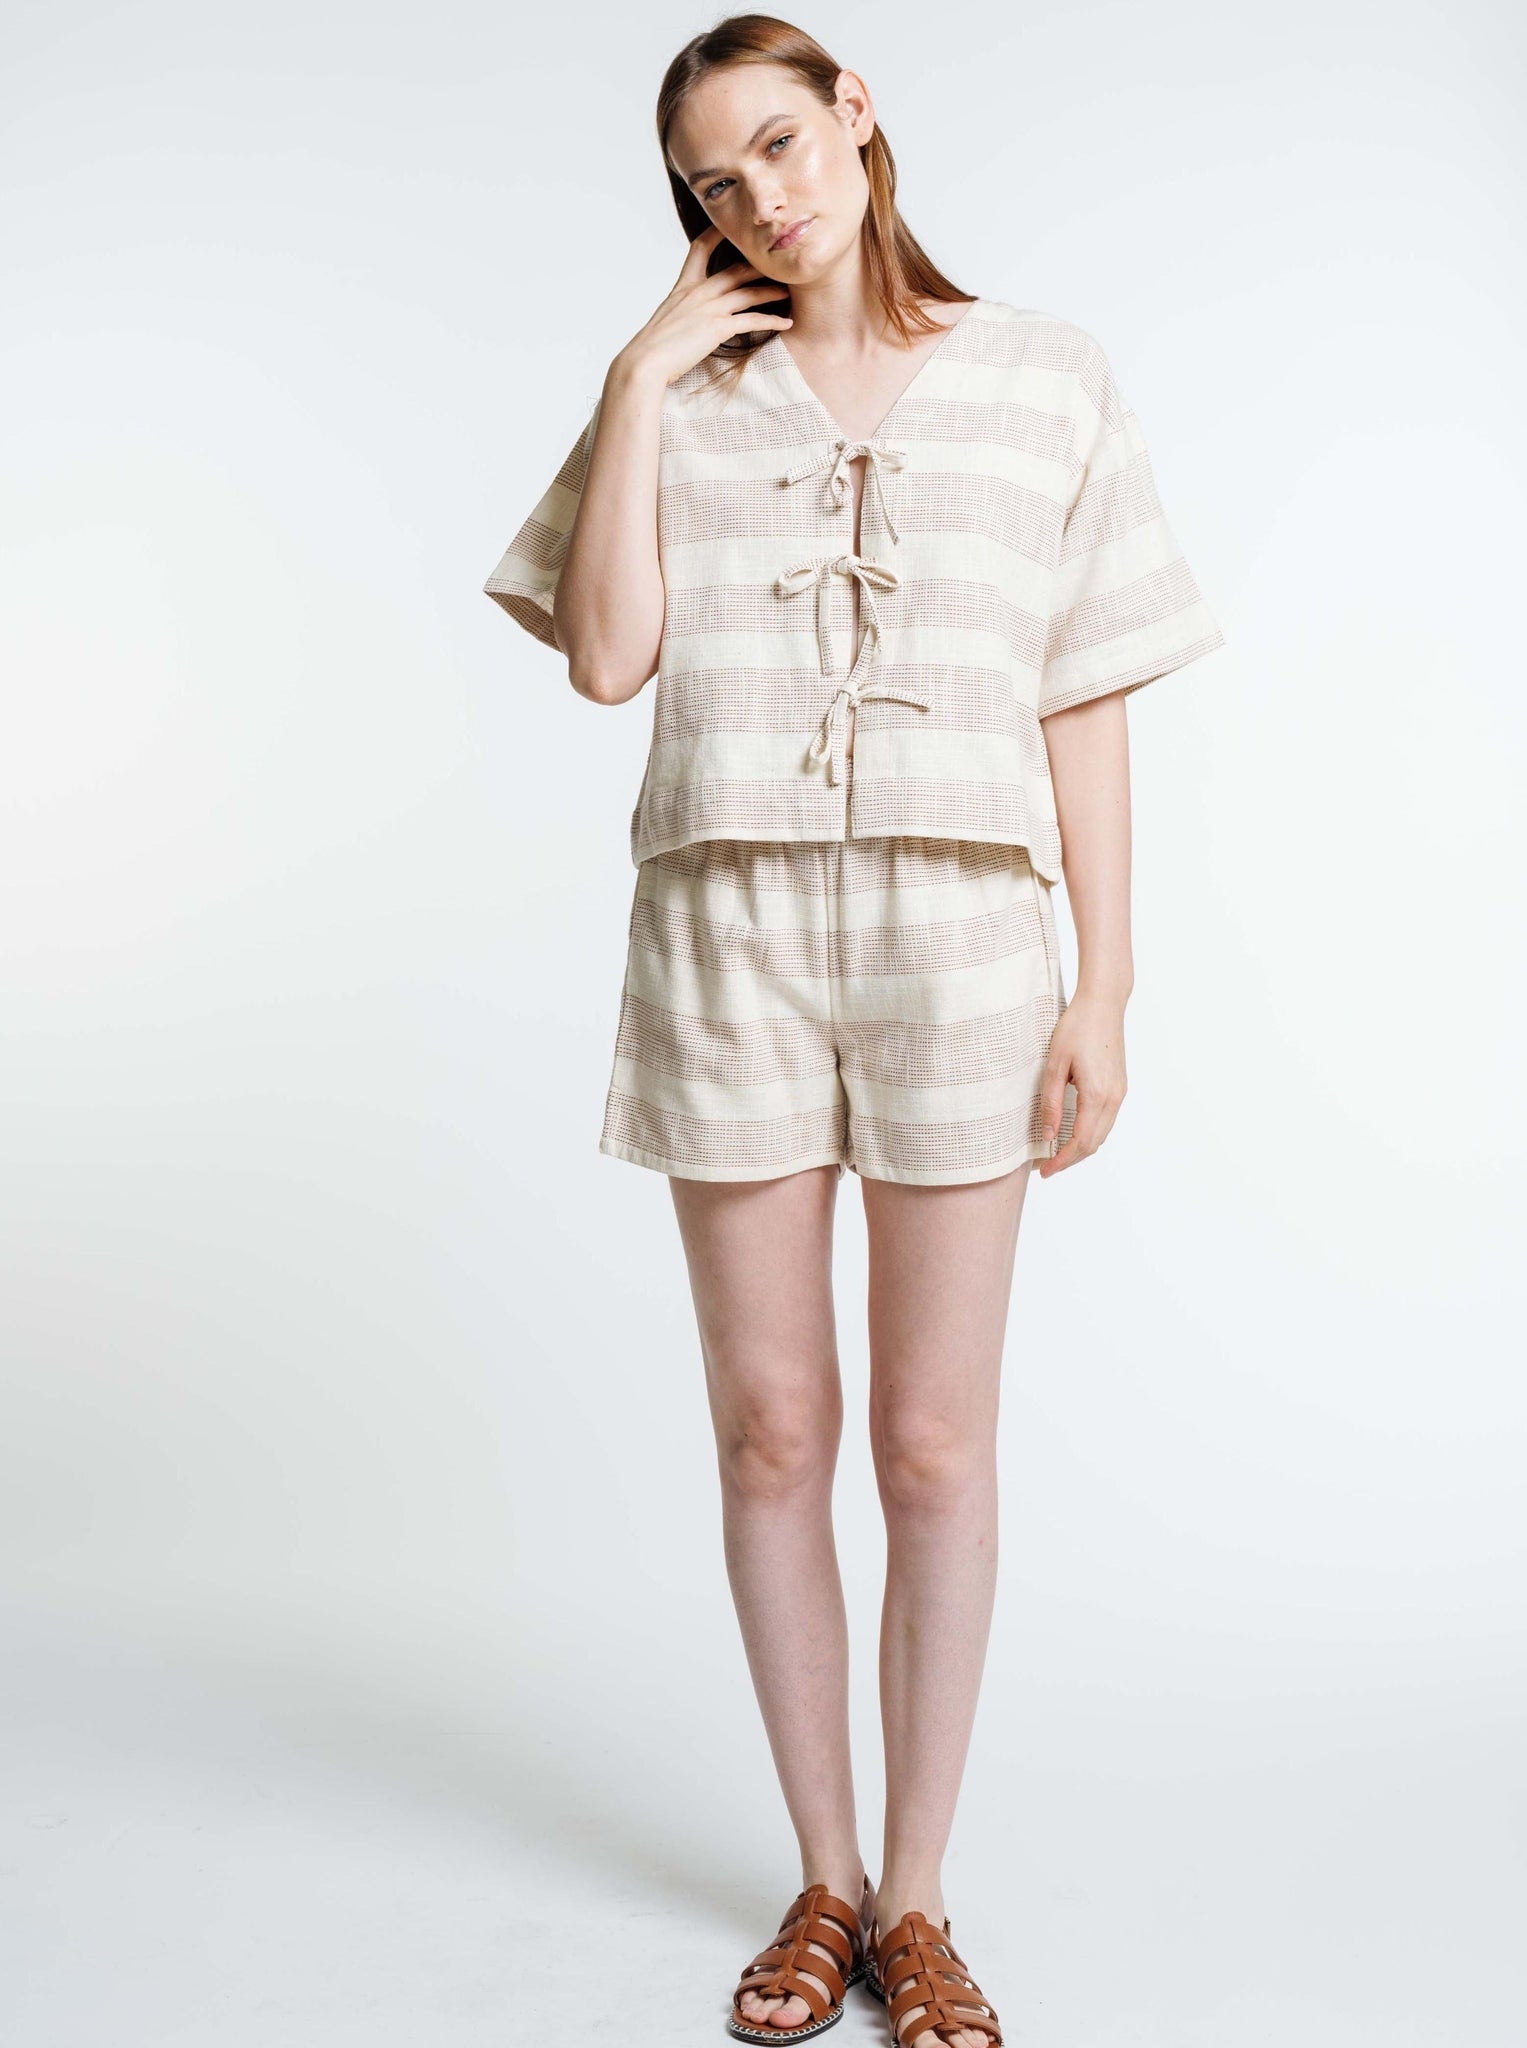 The model is wearing a Baker Top - Terracotta Ticking Stripe - Sample with short sleeves.